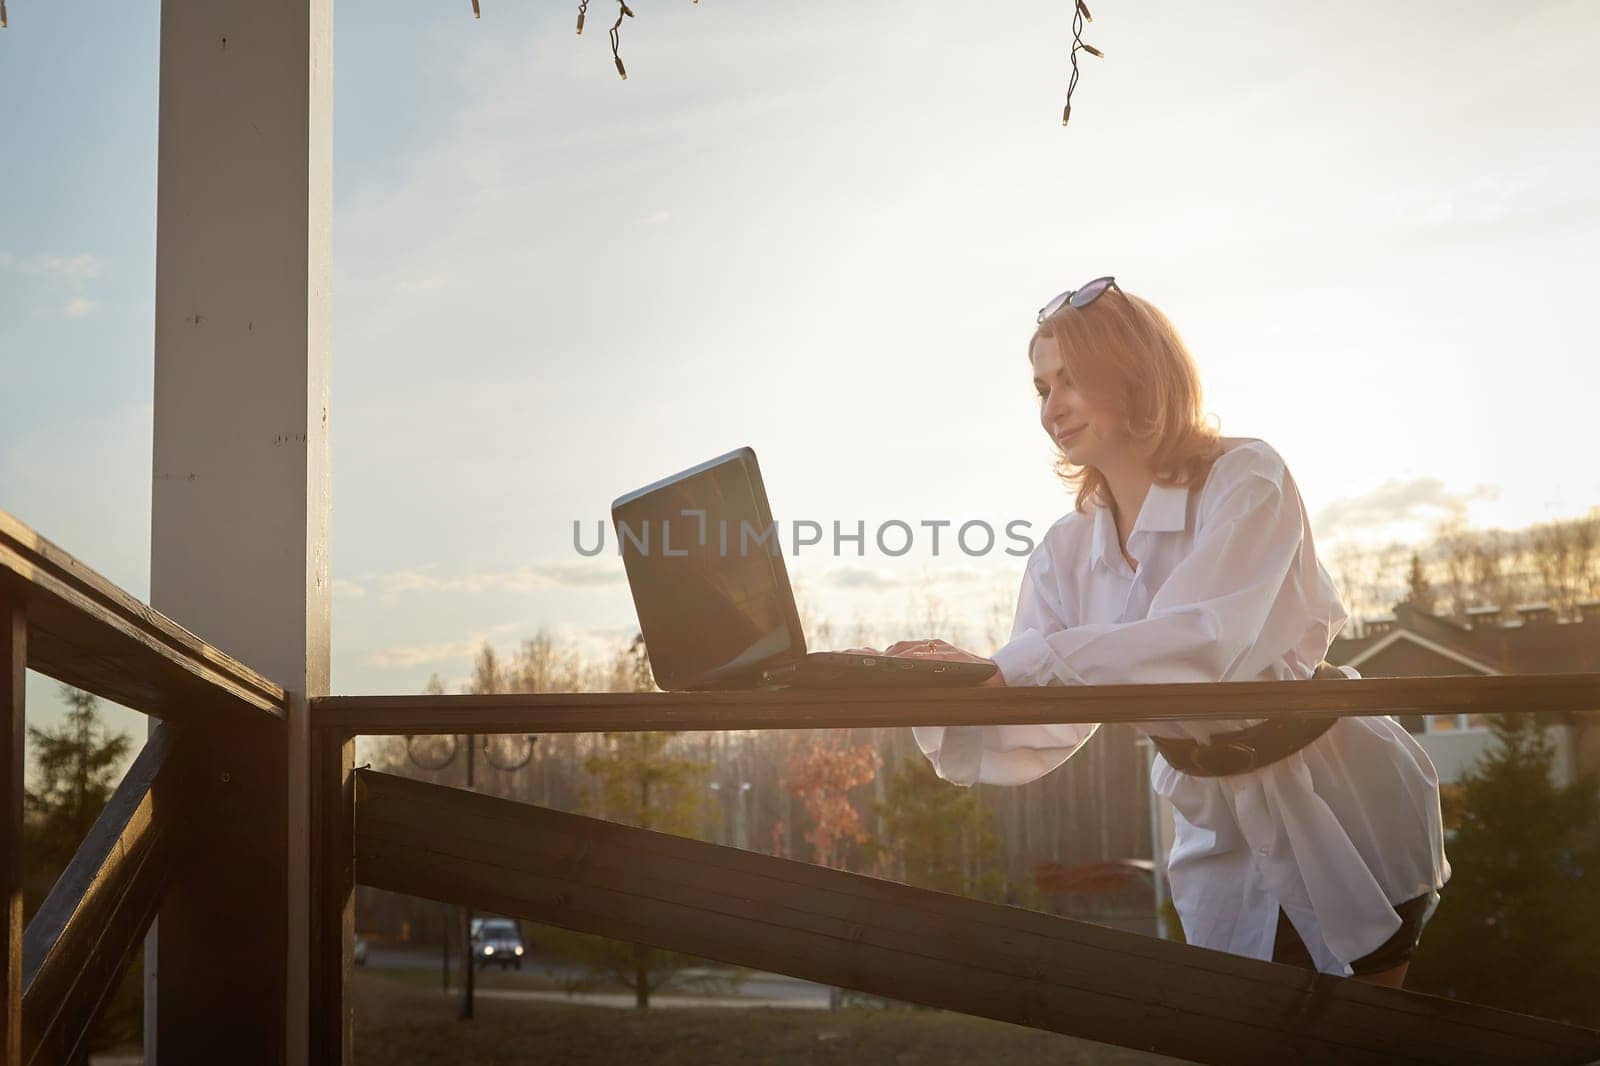 Beautiful redhead moden girl working by laptop in gazebo on autumn, summer or spring day. Businesswoman, student, freelancer or manager works outdoors in natural landscape in a village, city or town